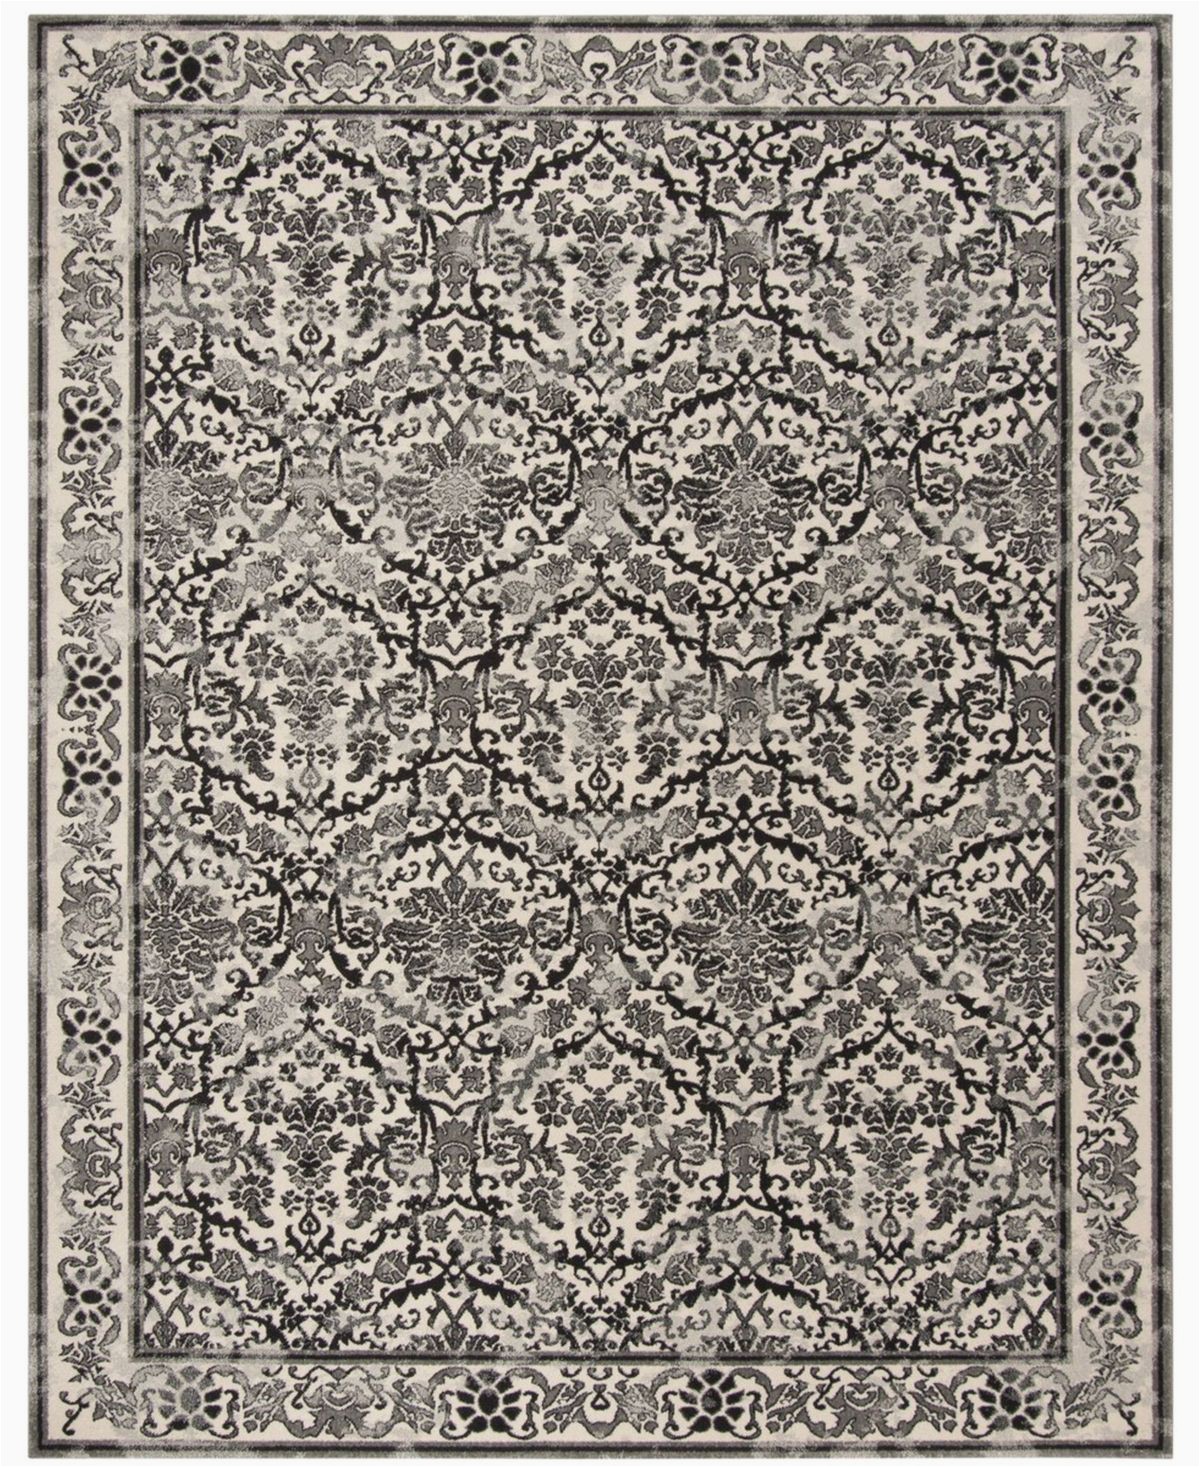 11 by 15 area Rugs Safavieh Evoke Ivory and Gray 11 X 15 area Rug & Reviews